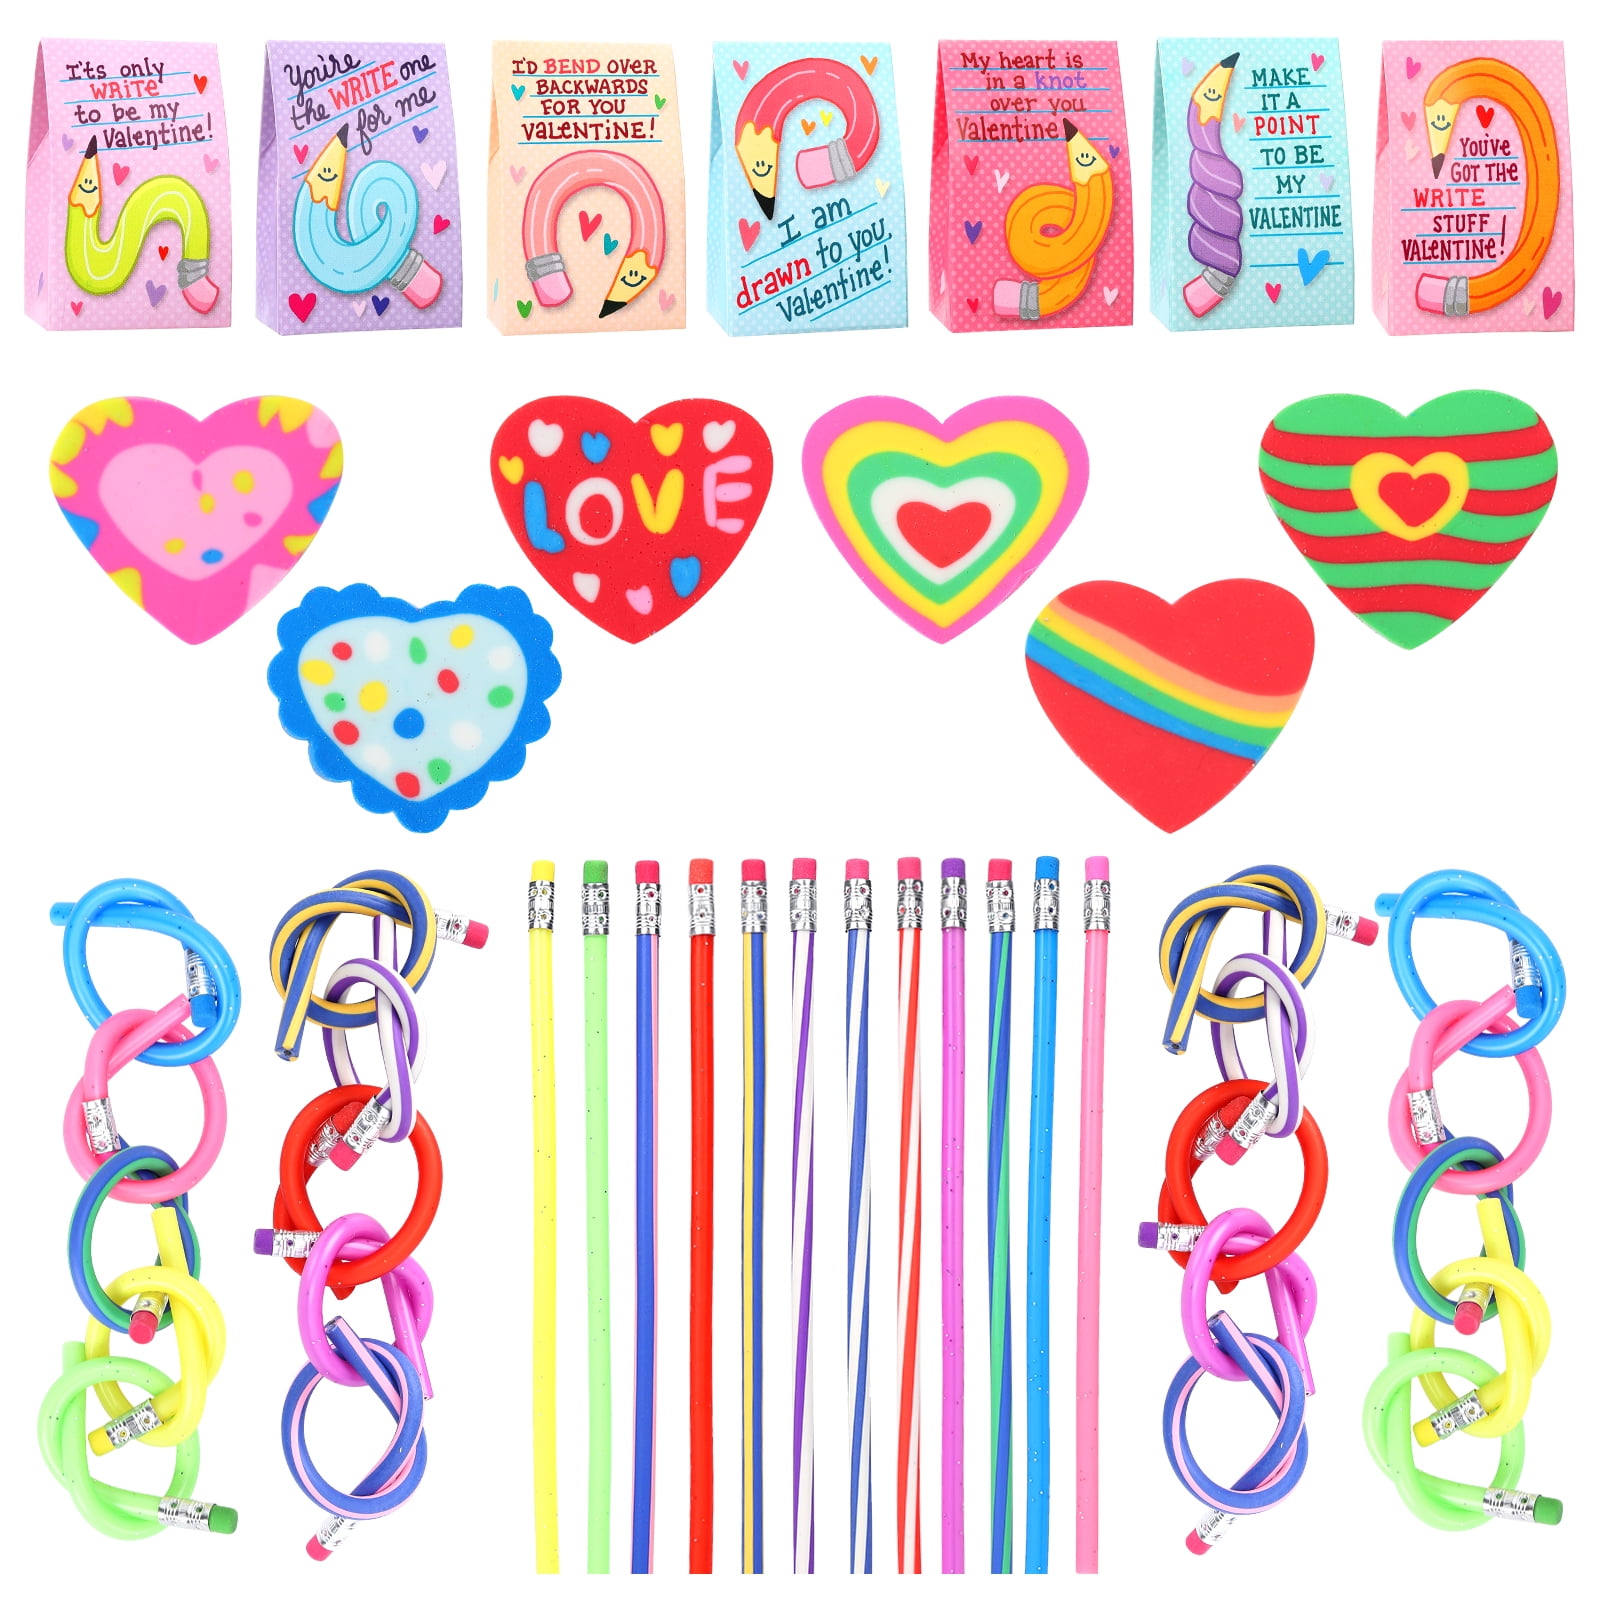  JOYIN 28 Pcs Valentine's Day Bendy Pencils Cross Through Heart  Shaped Valentine Cards for Valentine's Party Favors,Gift card, Greeting  card. : Office Products